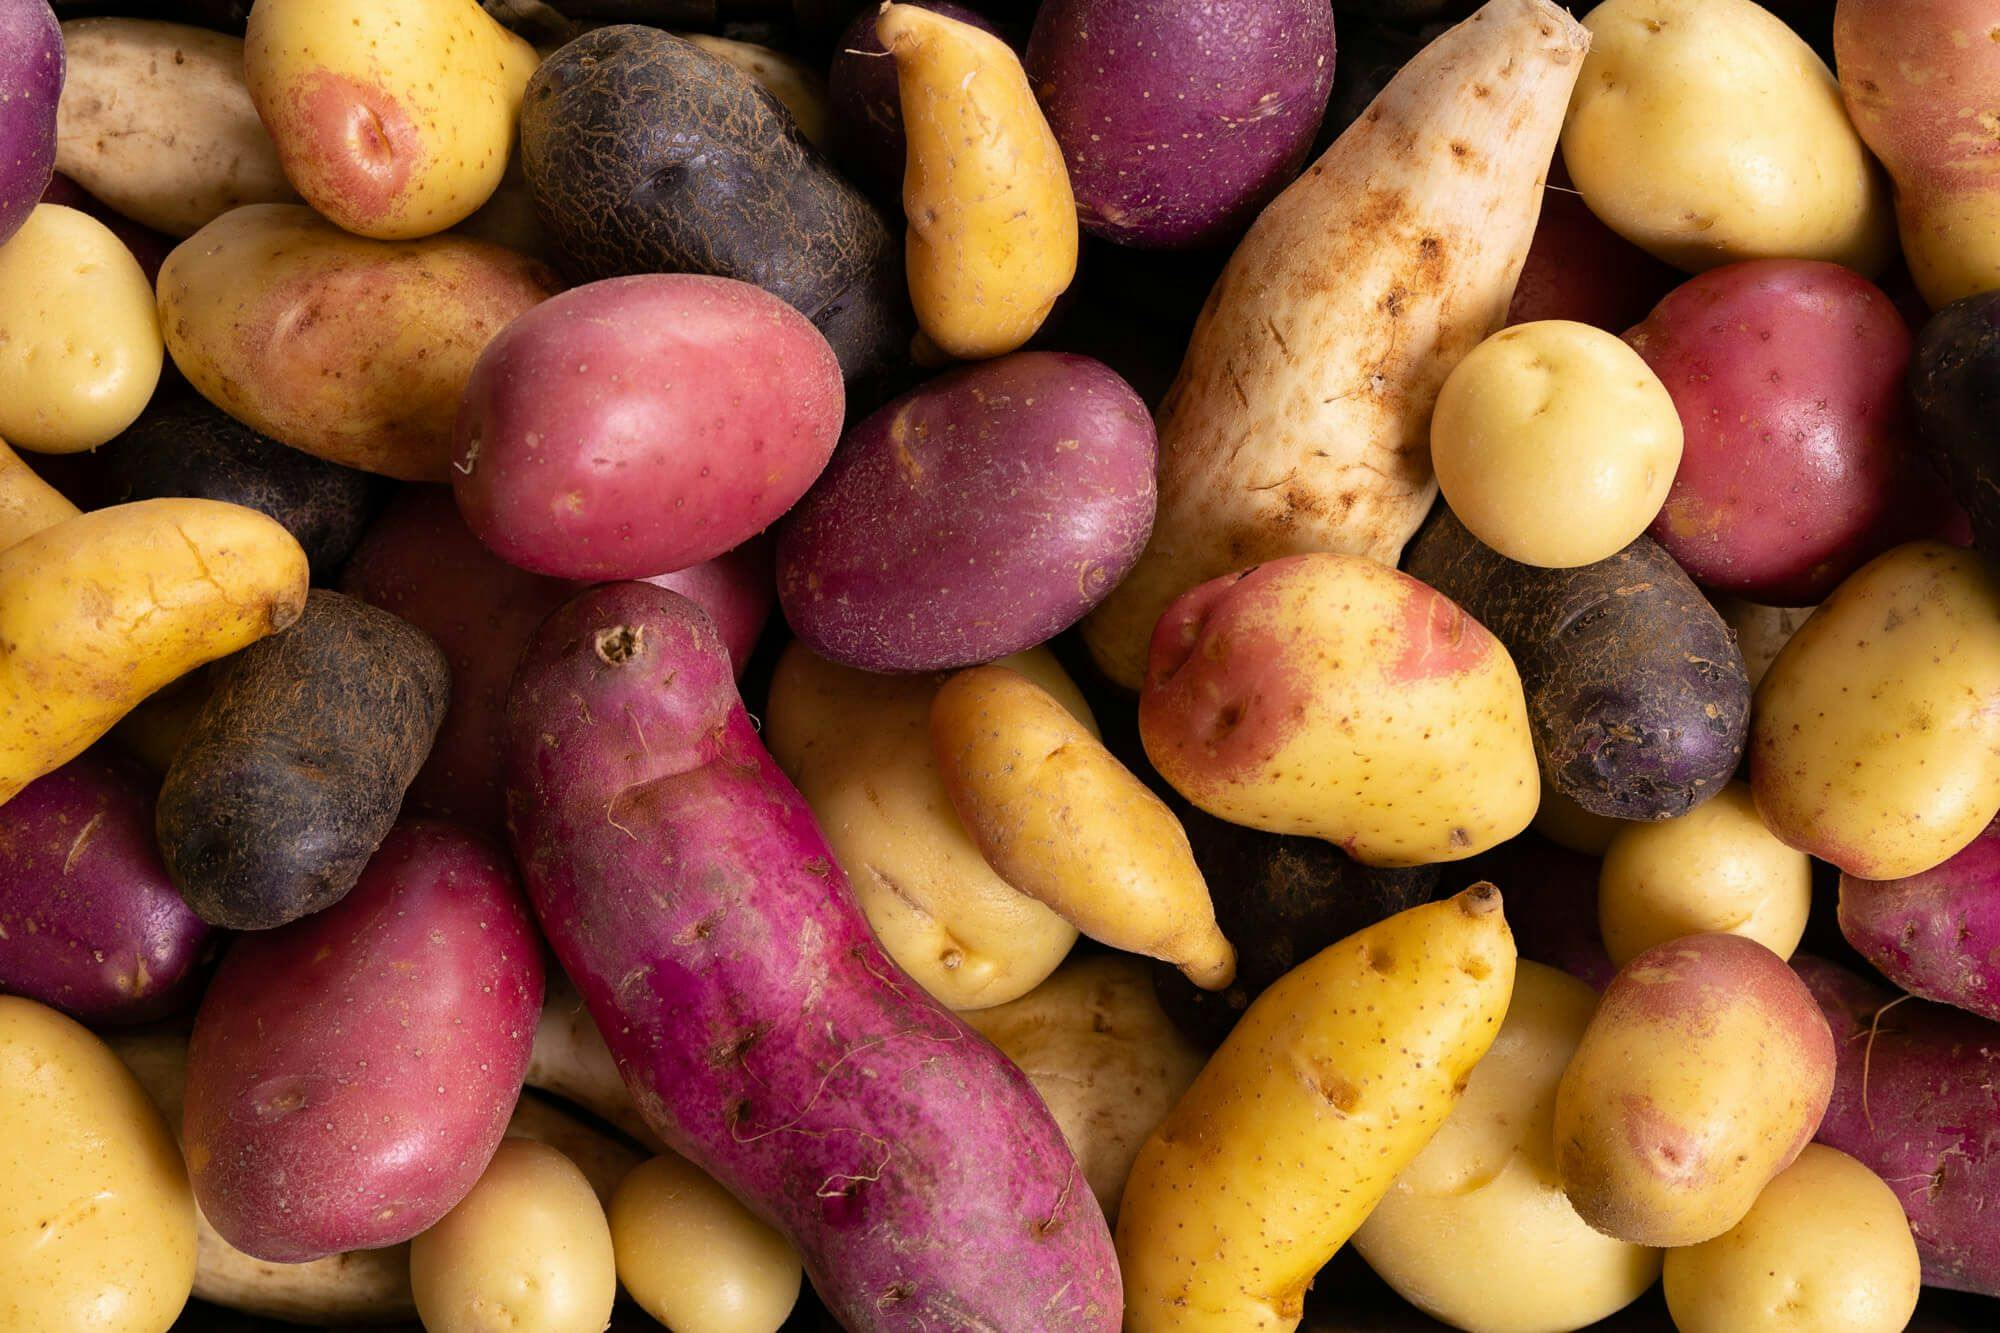 Top down view of a large variety of potatoes